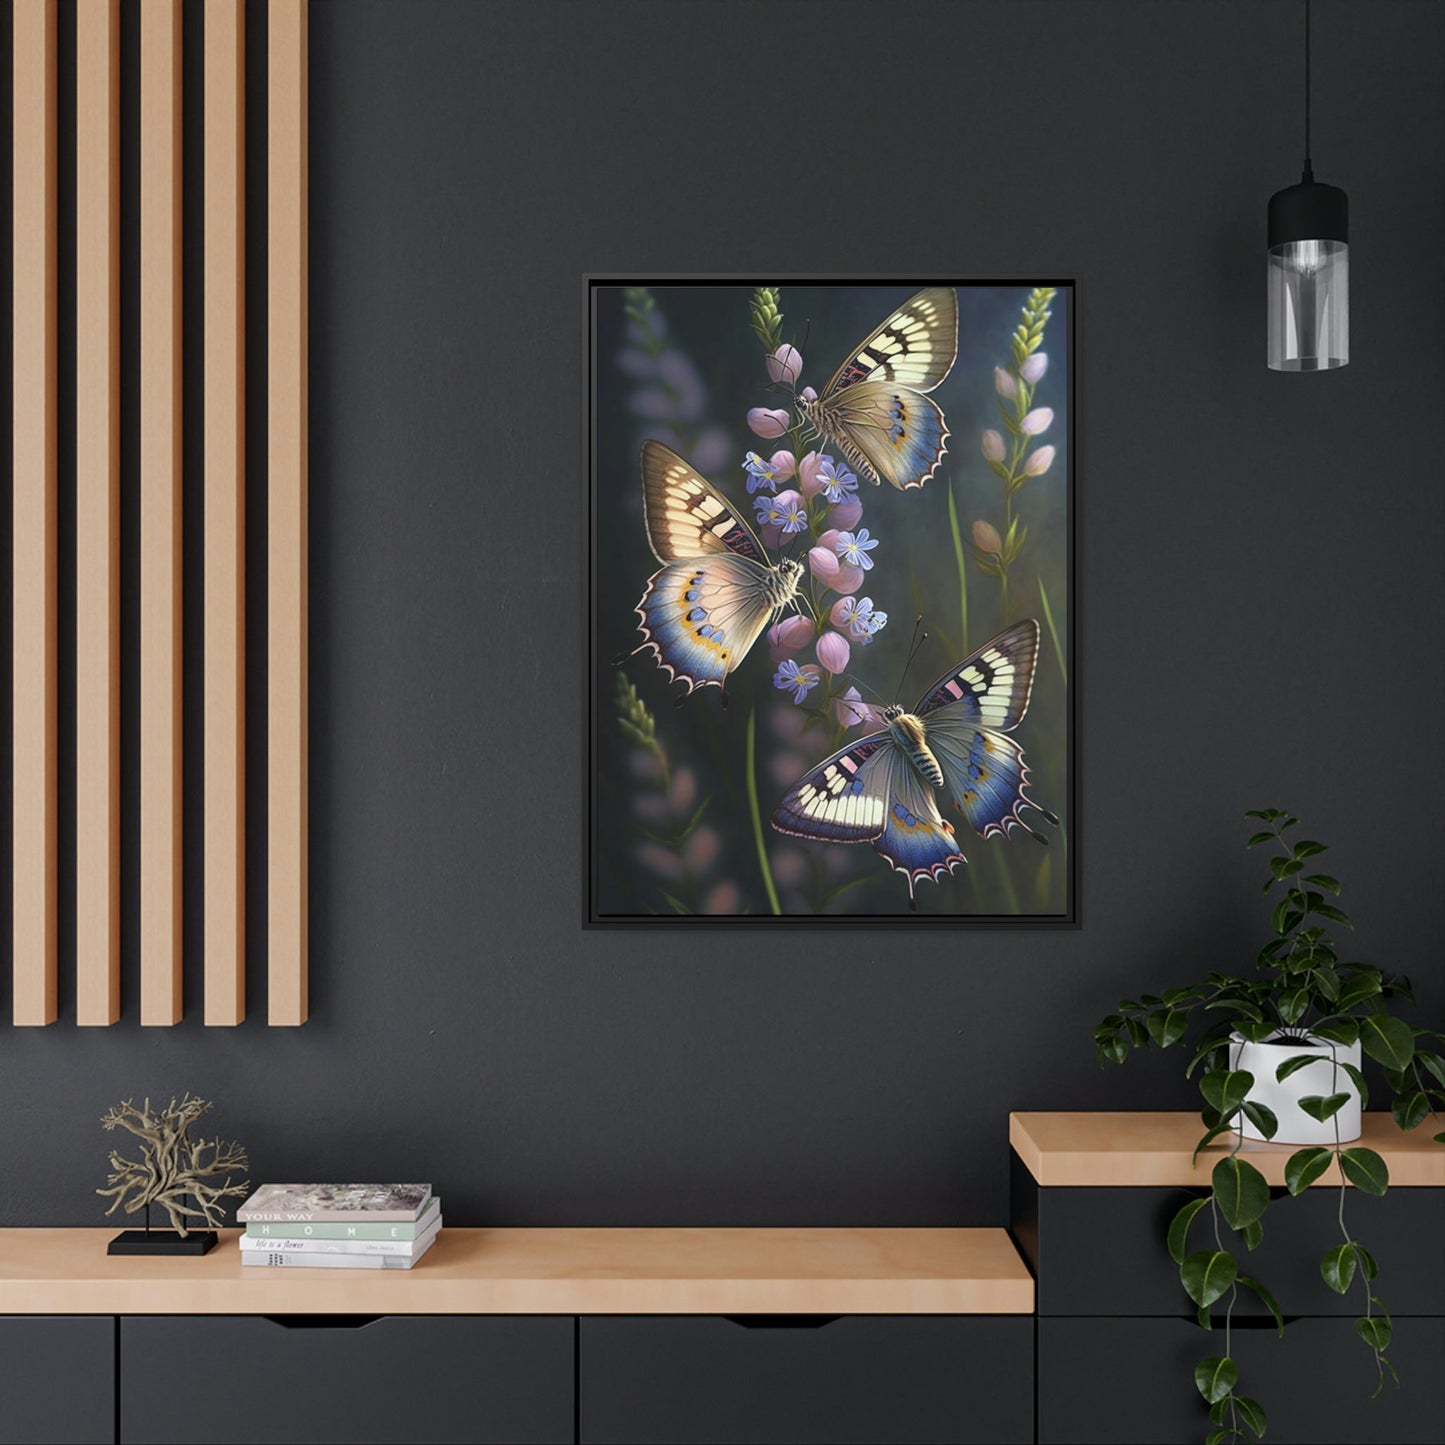 The Majesty of Butterflies: Framed Poster & Canvas Print of Majestic Insects